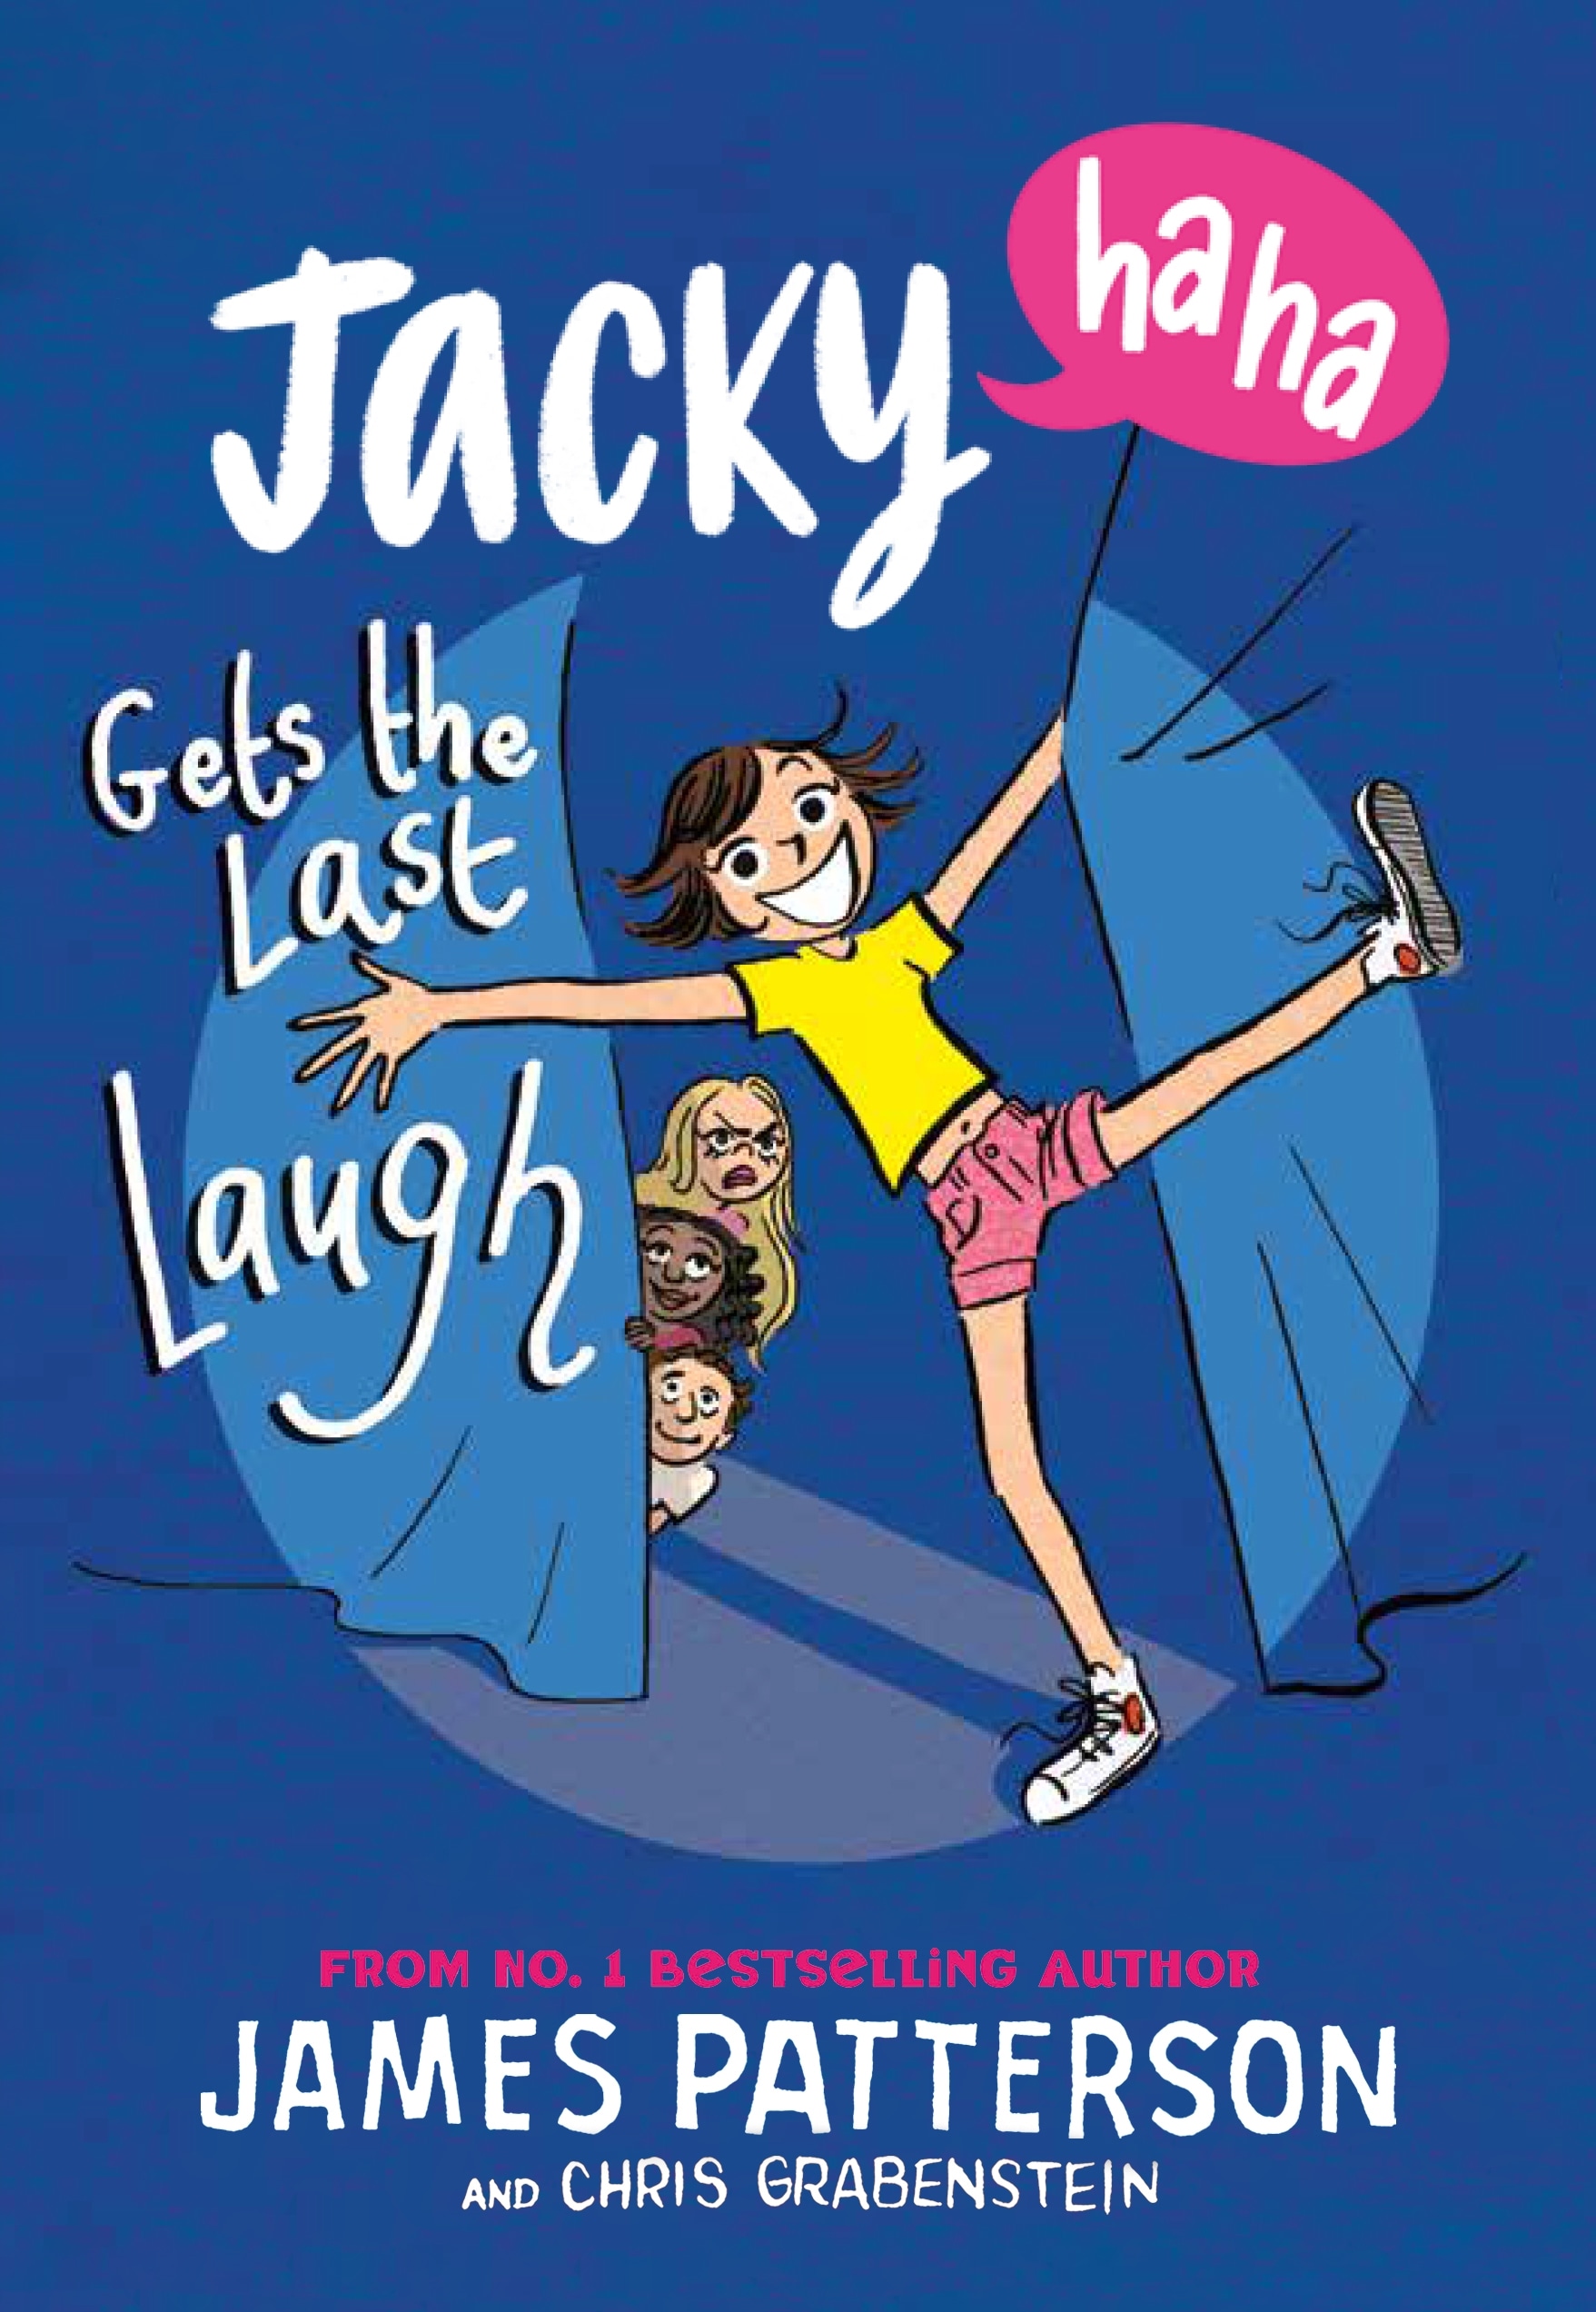 Book “Jacky Ha-Ha Gets the Last Laugh” by James Patterson — March 16, 2023